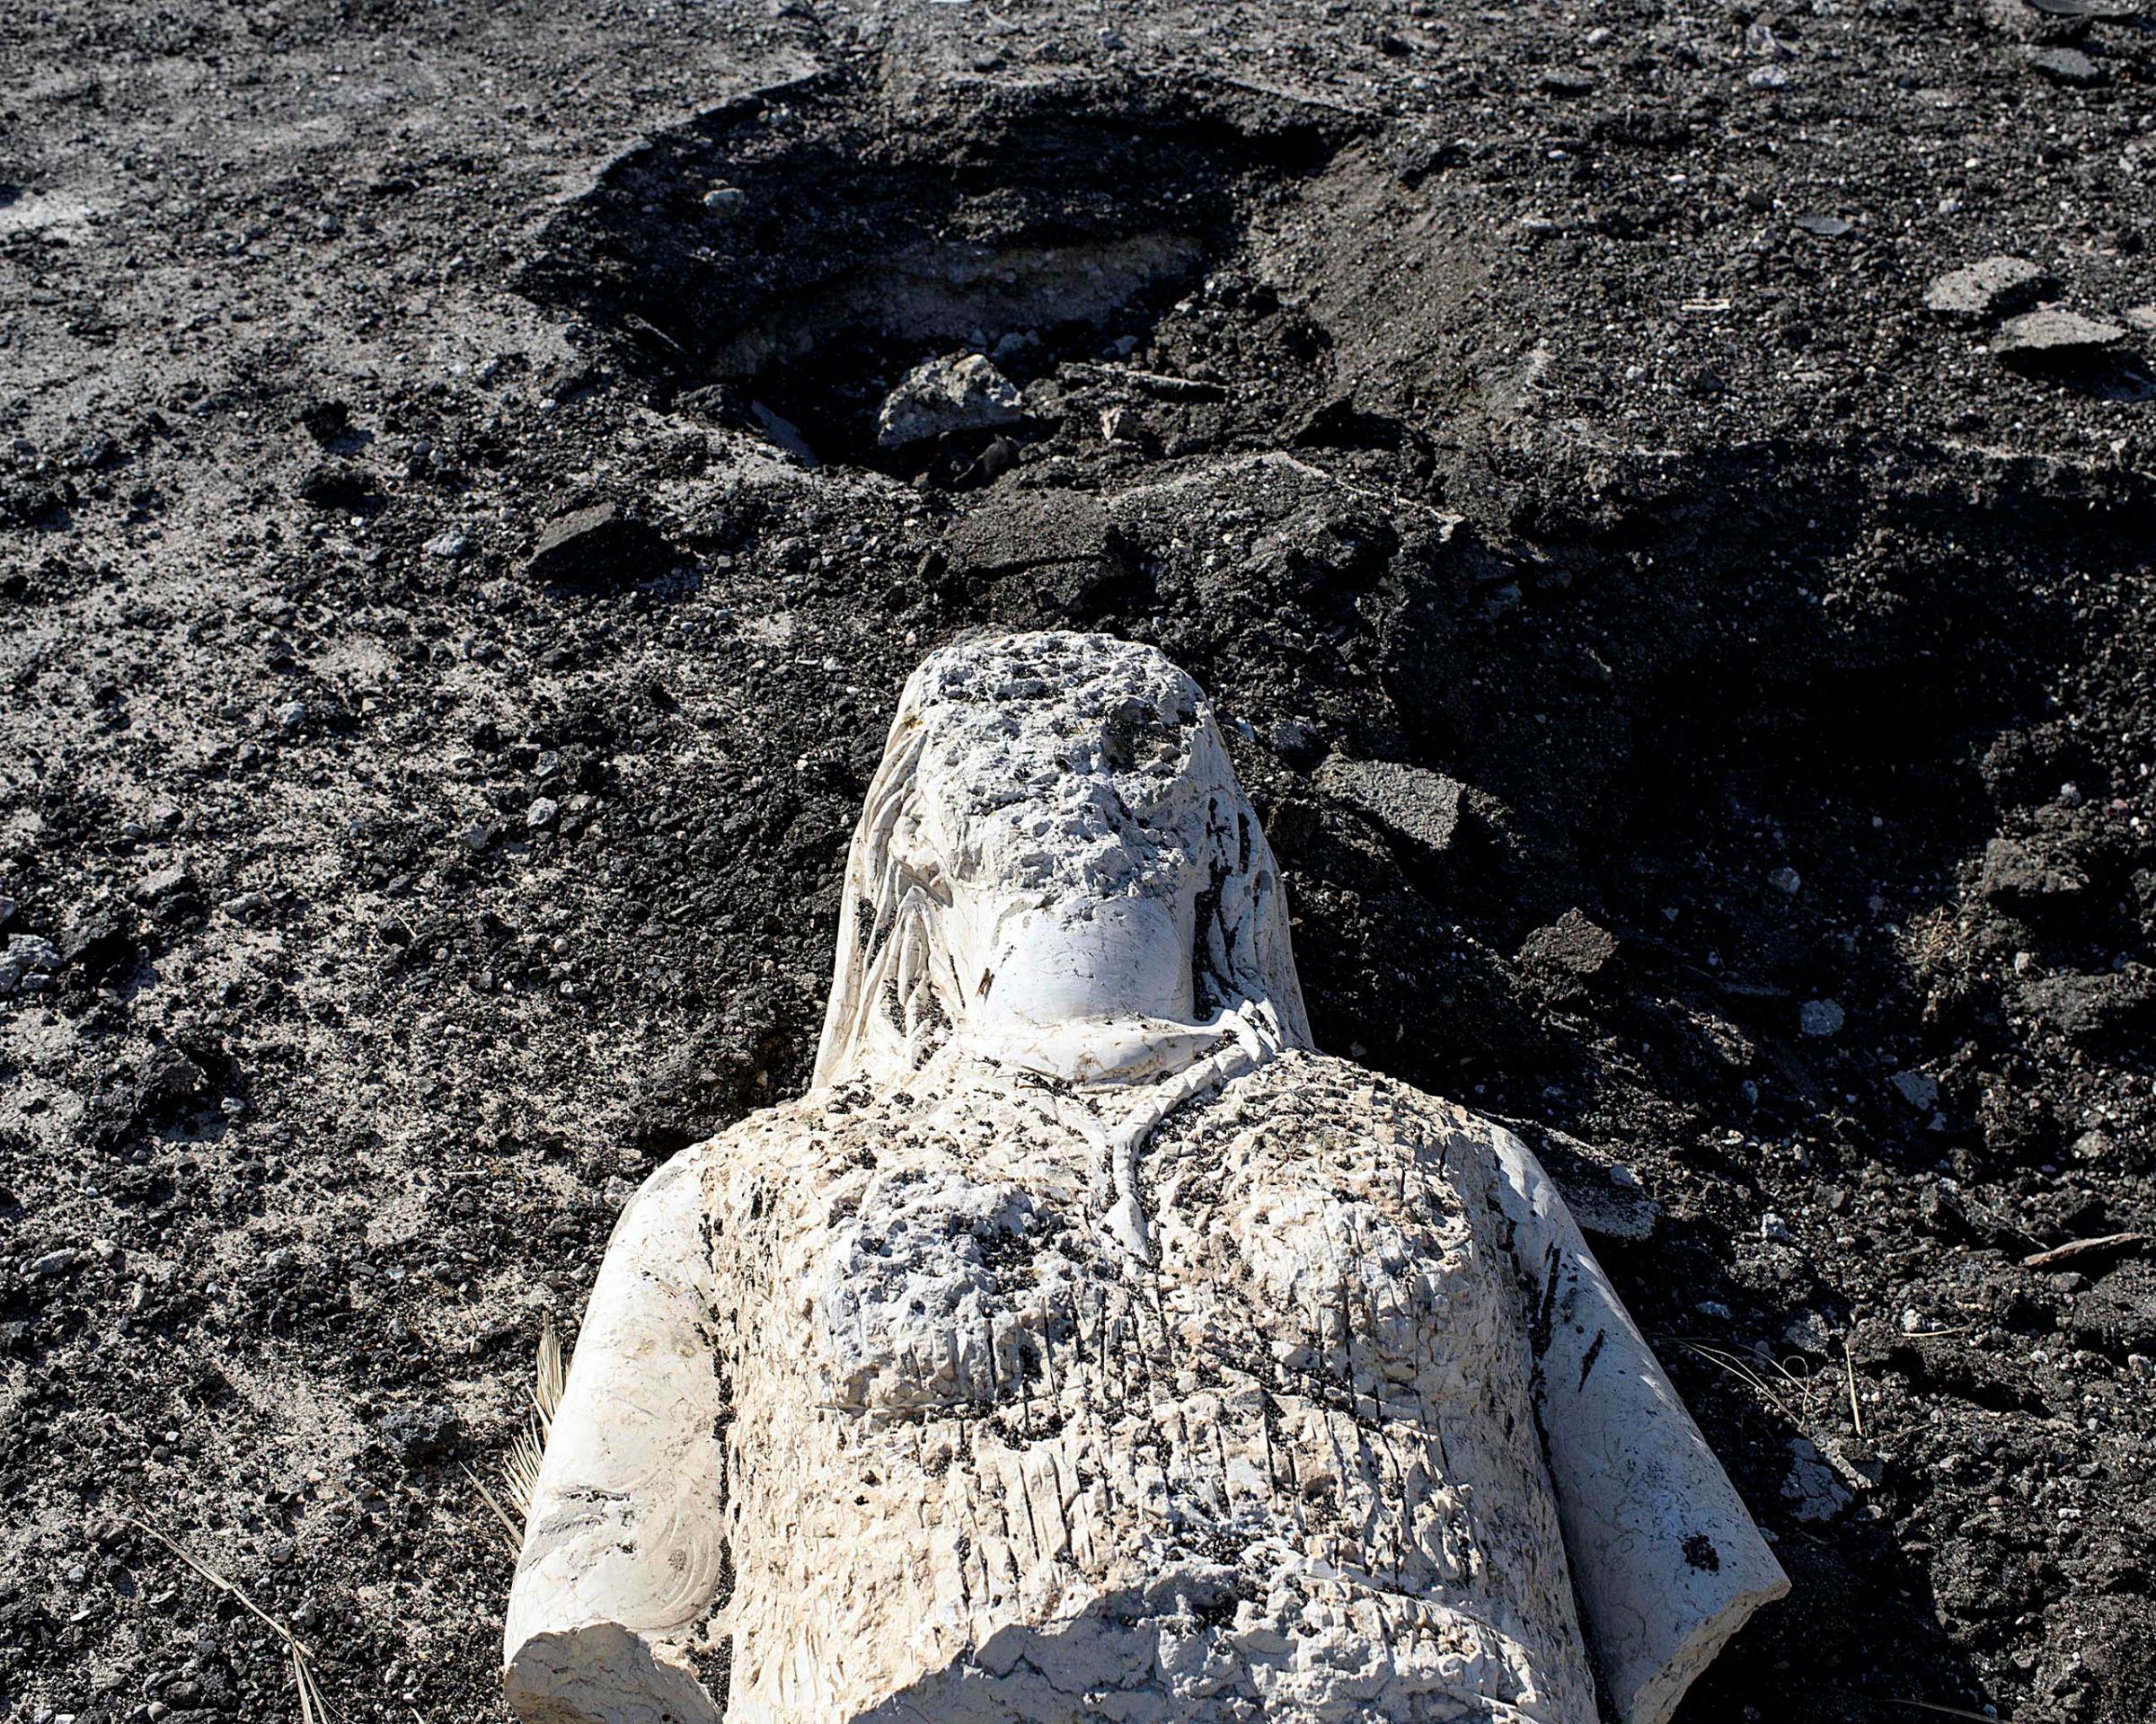 A defaced statue lies amongst holes left by the controlled detonation of mines planted by ISIS militants in central Palmyra, Syria, April 1, 2016.